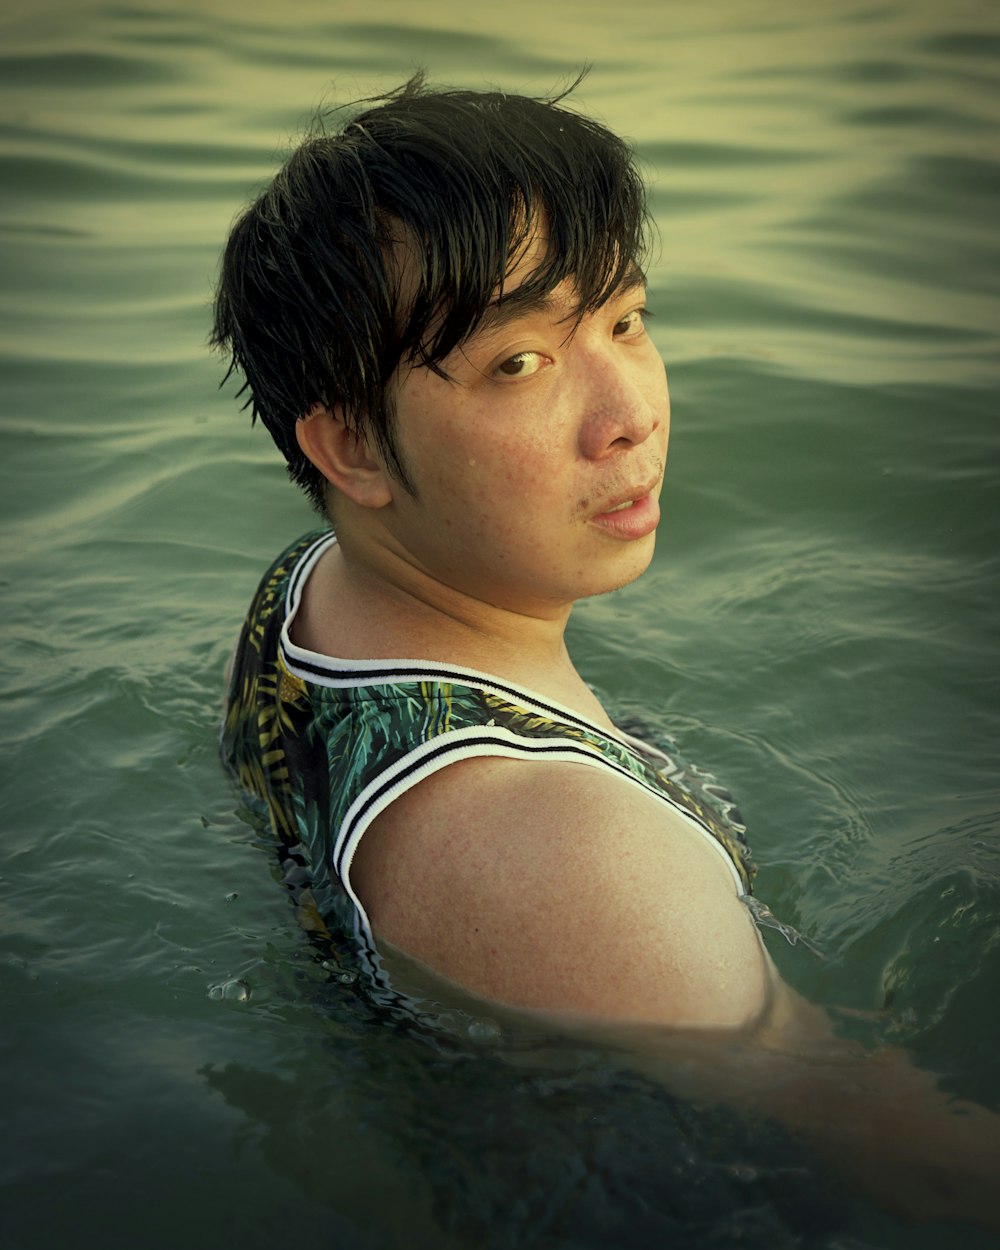 a person in a swimsuit in the water